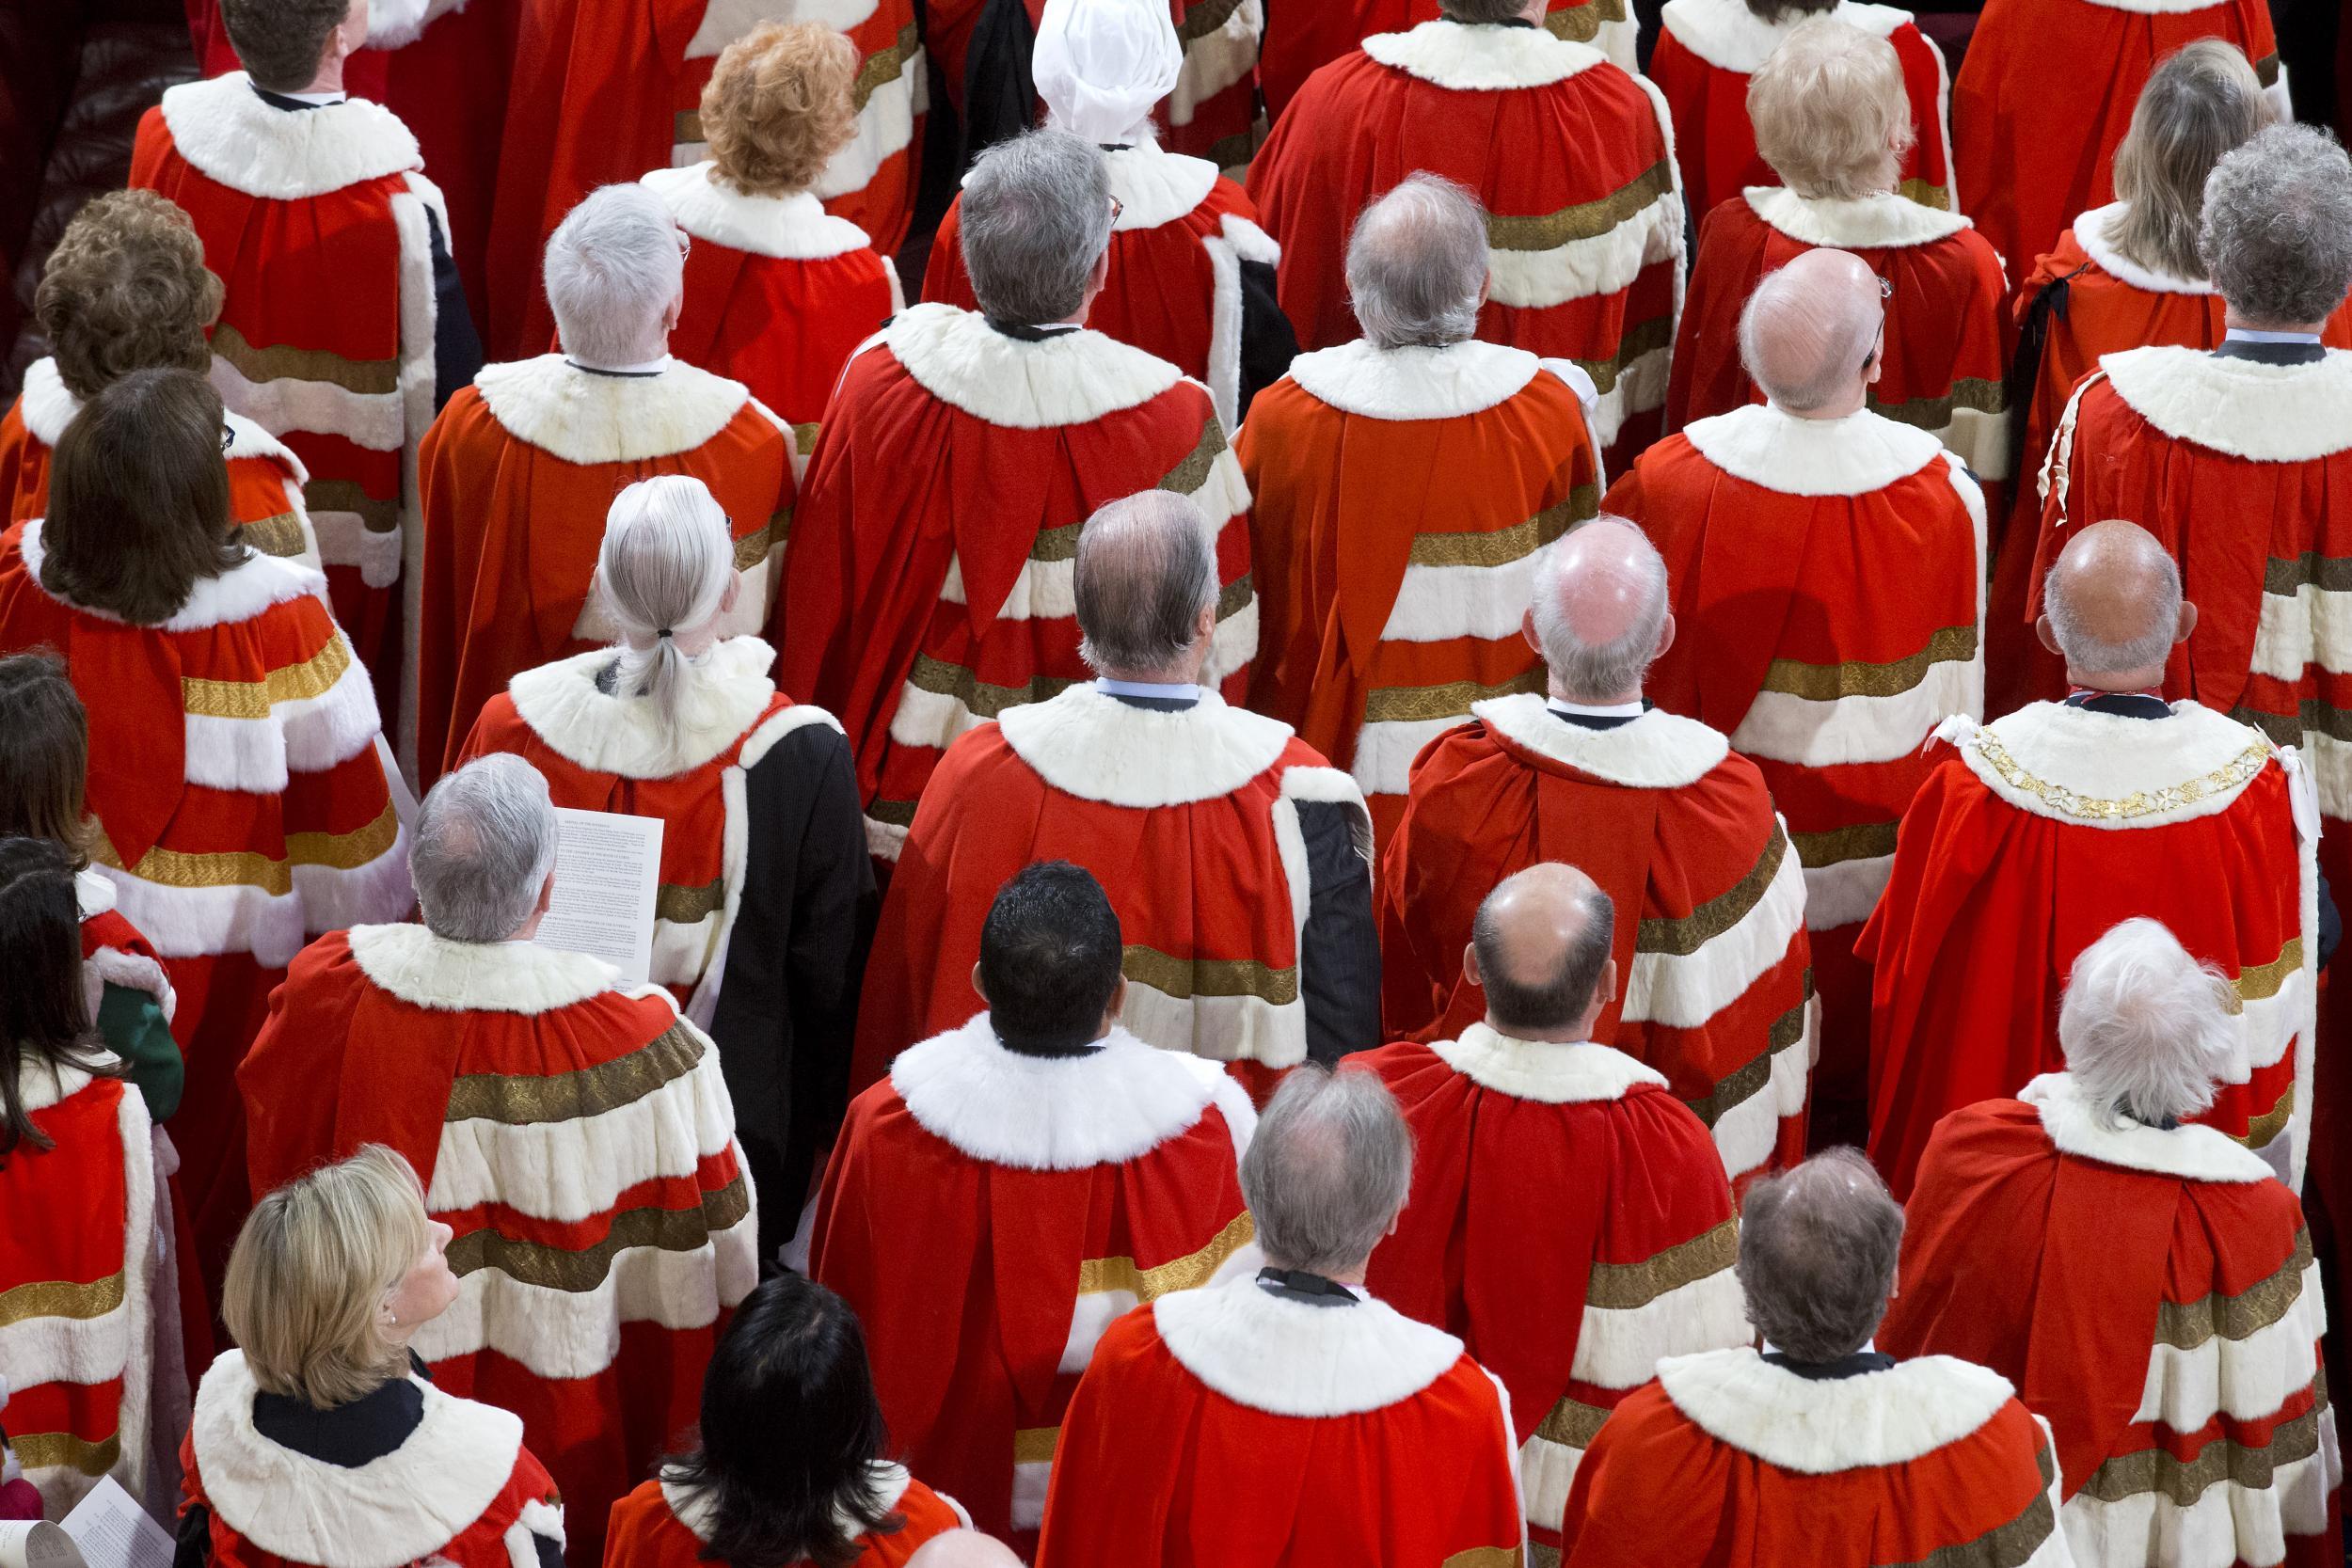 Peers in the House of Lords